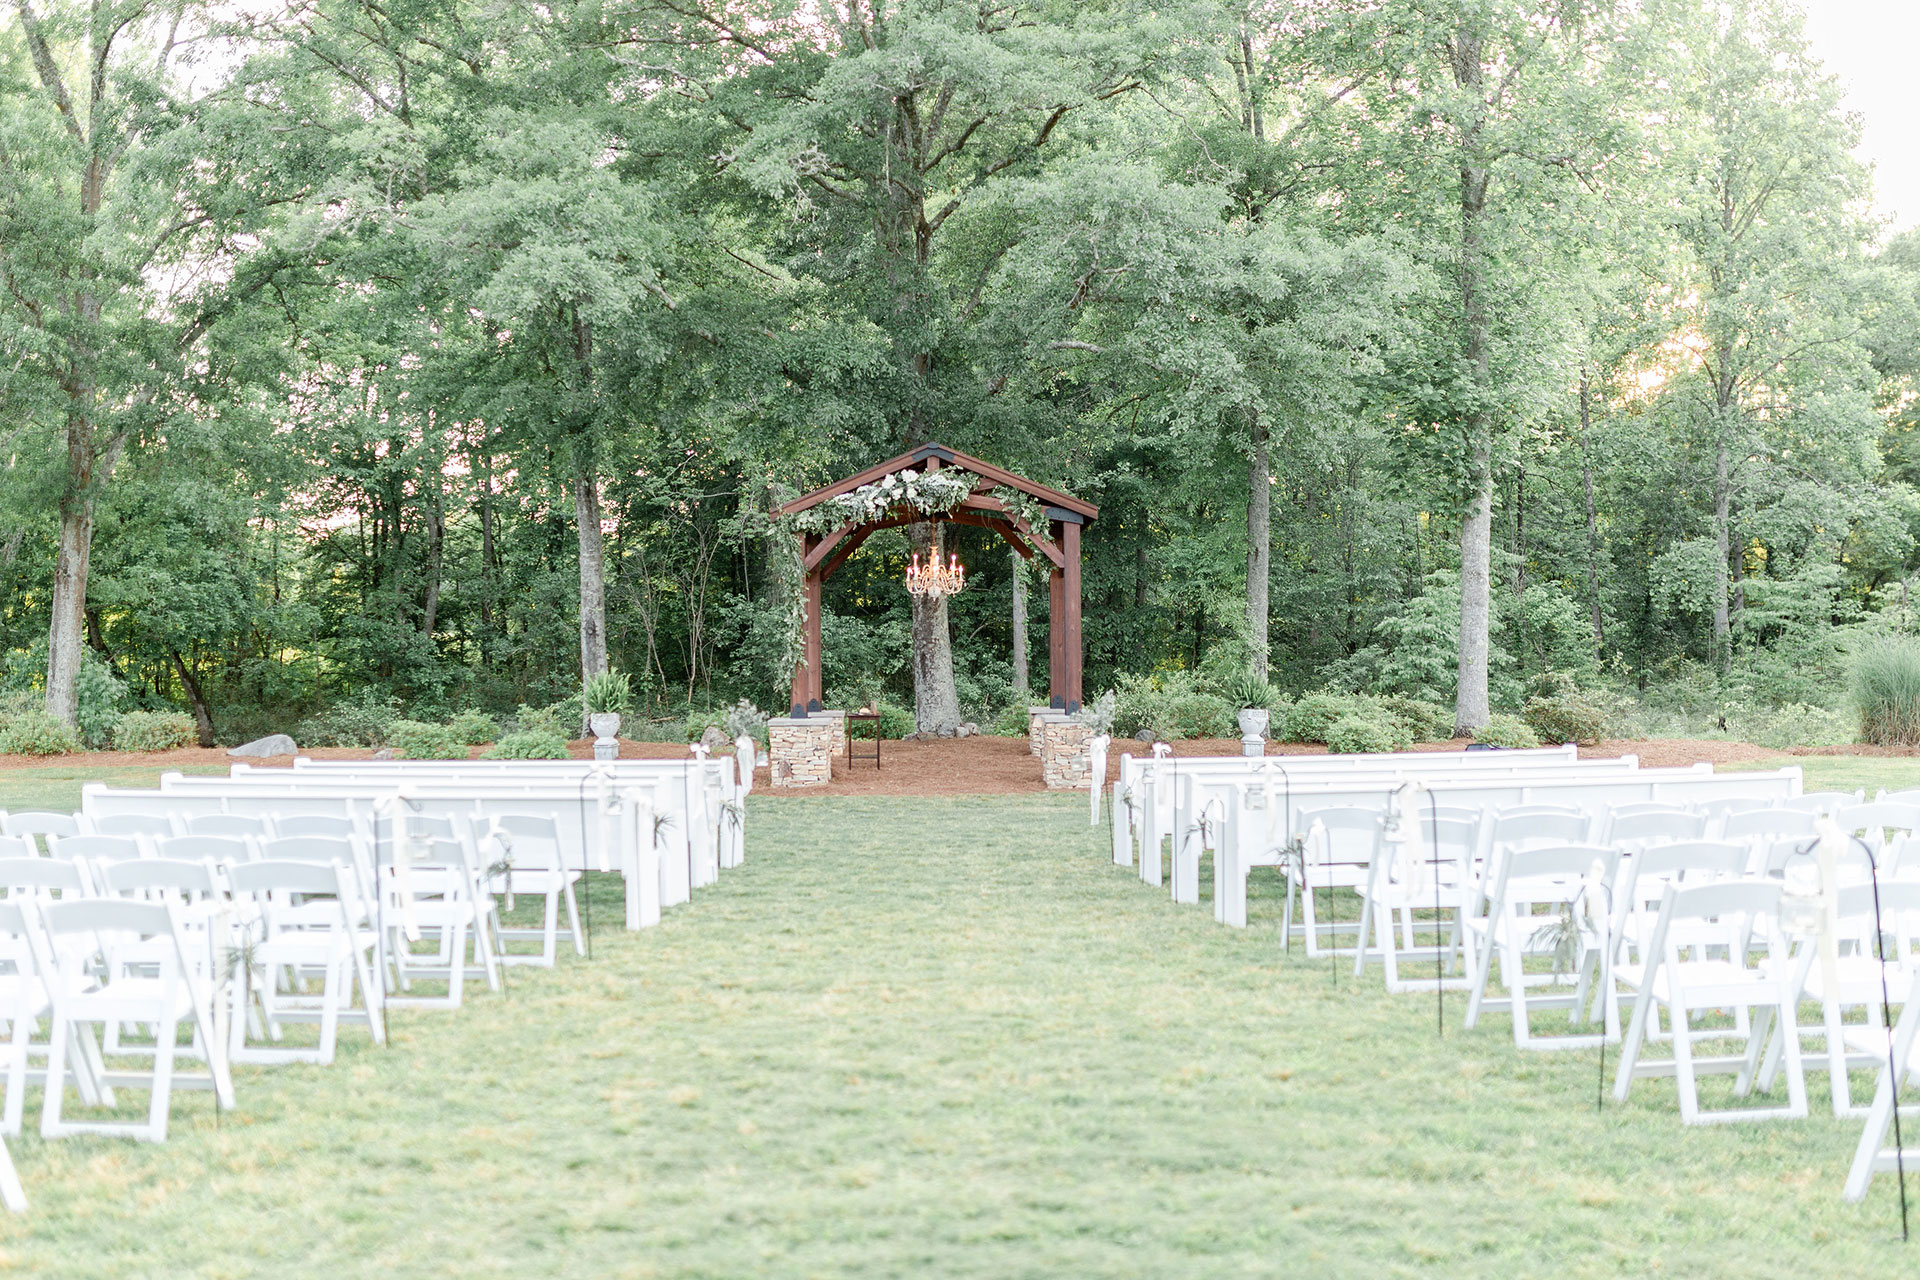 outdoor wedding venue setup with chairs and arbor